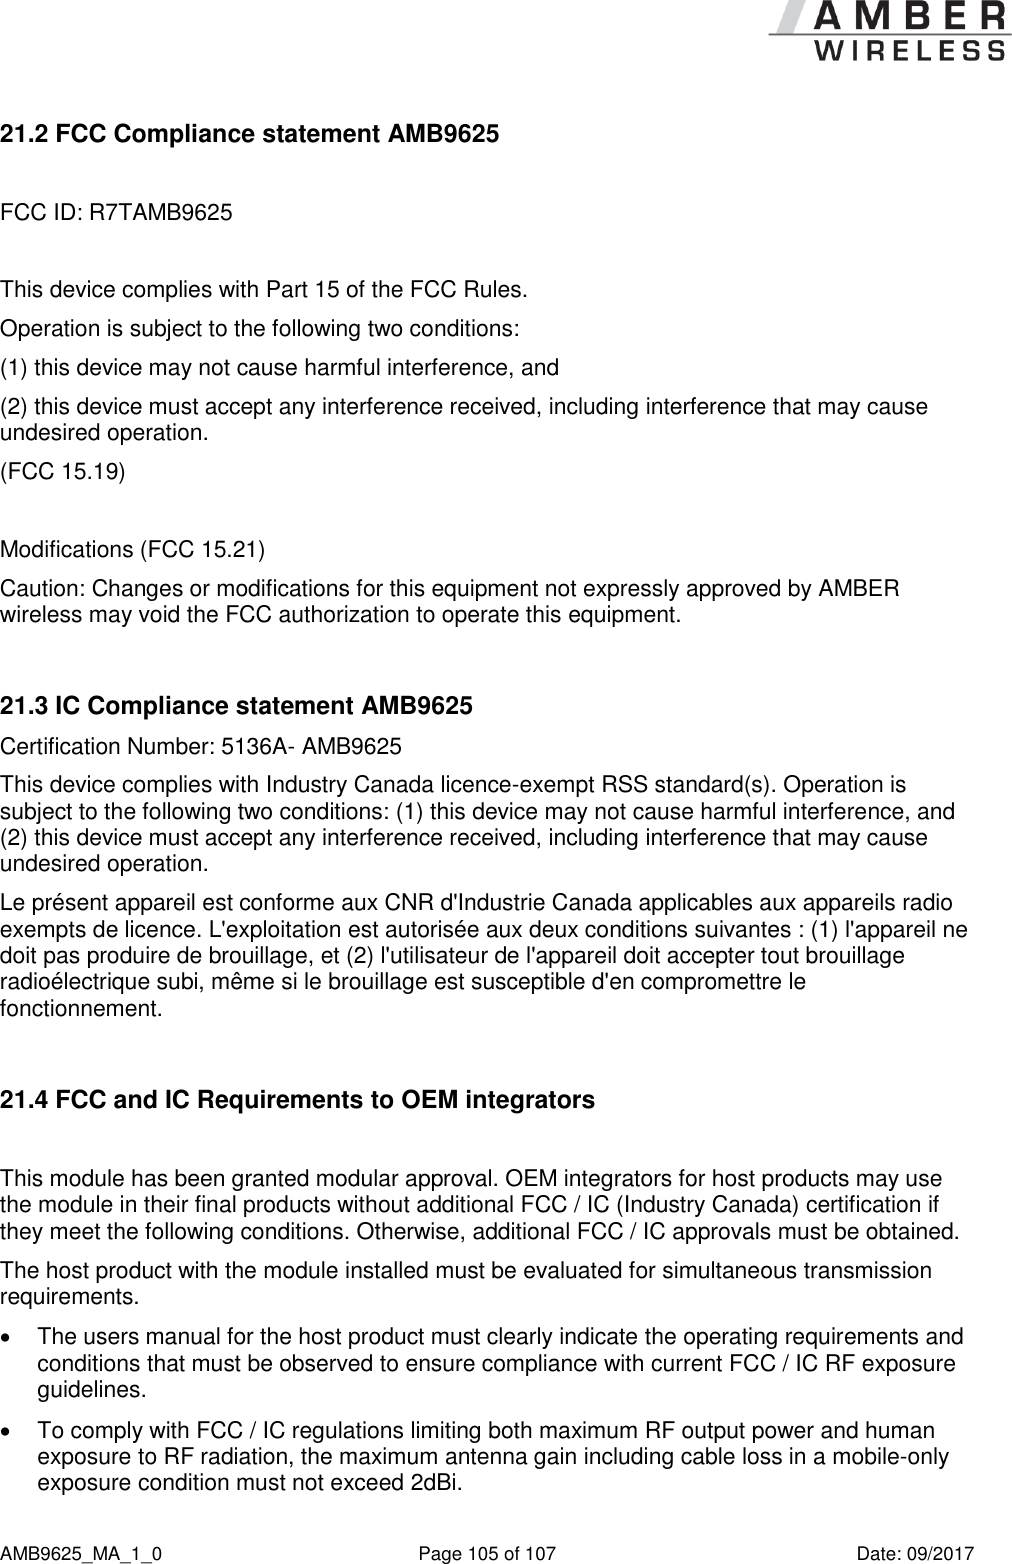      AMB9625_MA_1_0  Page 105 of 107  Date: 09/2017 21.2 FCC Compliance statement AMB9625  FCC ID: R7TAMB9625  This device complies with Part 15 of the FCC Rules.  Operation is subject to the following two conditions:  (1) this device may not cause harmful interference, and  (2) this device must accept any interference received, including interference that may cause undesired operation.  (FCC 15.19)  Modifications (FCC 15.21) Caution: Changes or modifications for this equipment not expressly approved by AMBER wireless may void the FCC authorization to operate this equipment.  21.3 IC Compliance statement AMB9625 Certification Number: 5136A- AMB9625 This device complies with Industry Canada licence-exempt RSS standard(s). Operation is subject to the following two conditions: (1) this device may not cause harmful interference, and (2) this device must accept any interference received, including interference that may cause undesired operation. Le présent appareil est conforme aux CNR d&apos;Industrie Canada applicables aux appareils radio exempts de licence. L&apos;exploitation est autorisée aux deux conditions suivantes : (1) l&apos;appareil ne doit pas produire de brouillage, et (2) l&apos;utilisateur de l&apos;appareil doit accepter tout brouillage radioélectrique subi, même si le brouillage est susceptible d&apos;en compromettre le fonctionnement.  21.4 FCC and IC Requirements to OEM integrators  This module has been granted modular approval. OEM integrators for host products may use the module in their final products without additional FCC / IC (Industry Canada) certification if they meet the following conditions. Otherwise, additional FCC / IC approvals must be obtained. The host product with the module installed must be evaluated for simultaneous transmission requirements.    The users manual for the host product must clearly indicate the operating requirements and conditions that must be observed to ensure compliance with current FCC / IC RF exposure guidelines.    To comply with FCC / IC regulations limiting both maximum RF output power and human exposure to RF radiation, the maximum antenna gain including cable loss in a mobile-only exposure condition must not exceed 2dBi.  